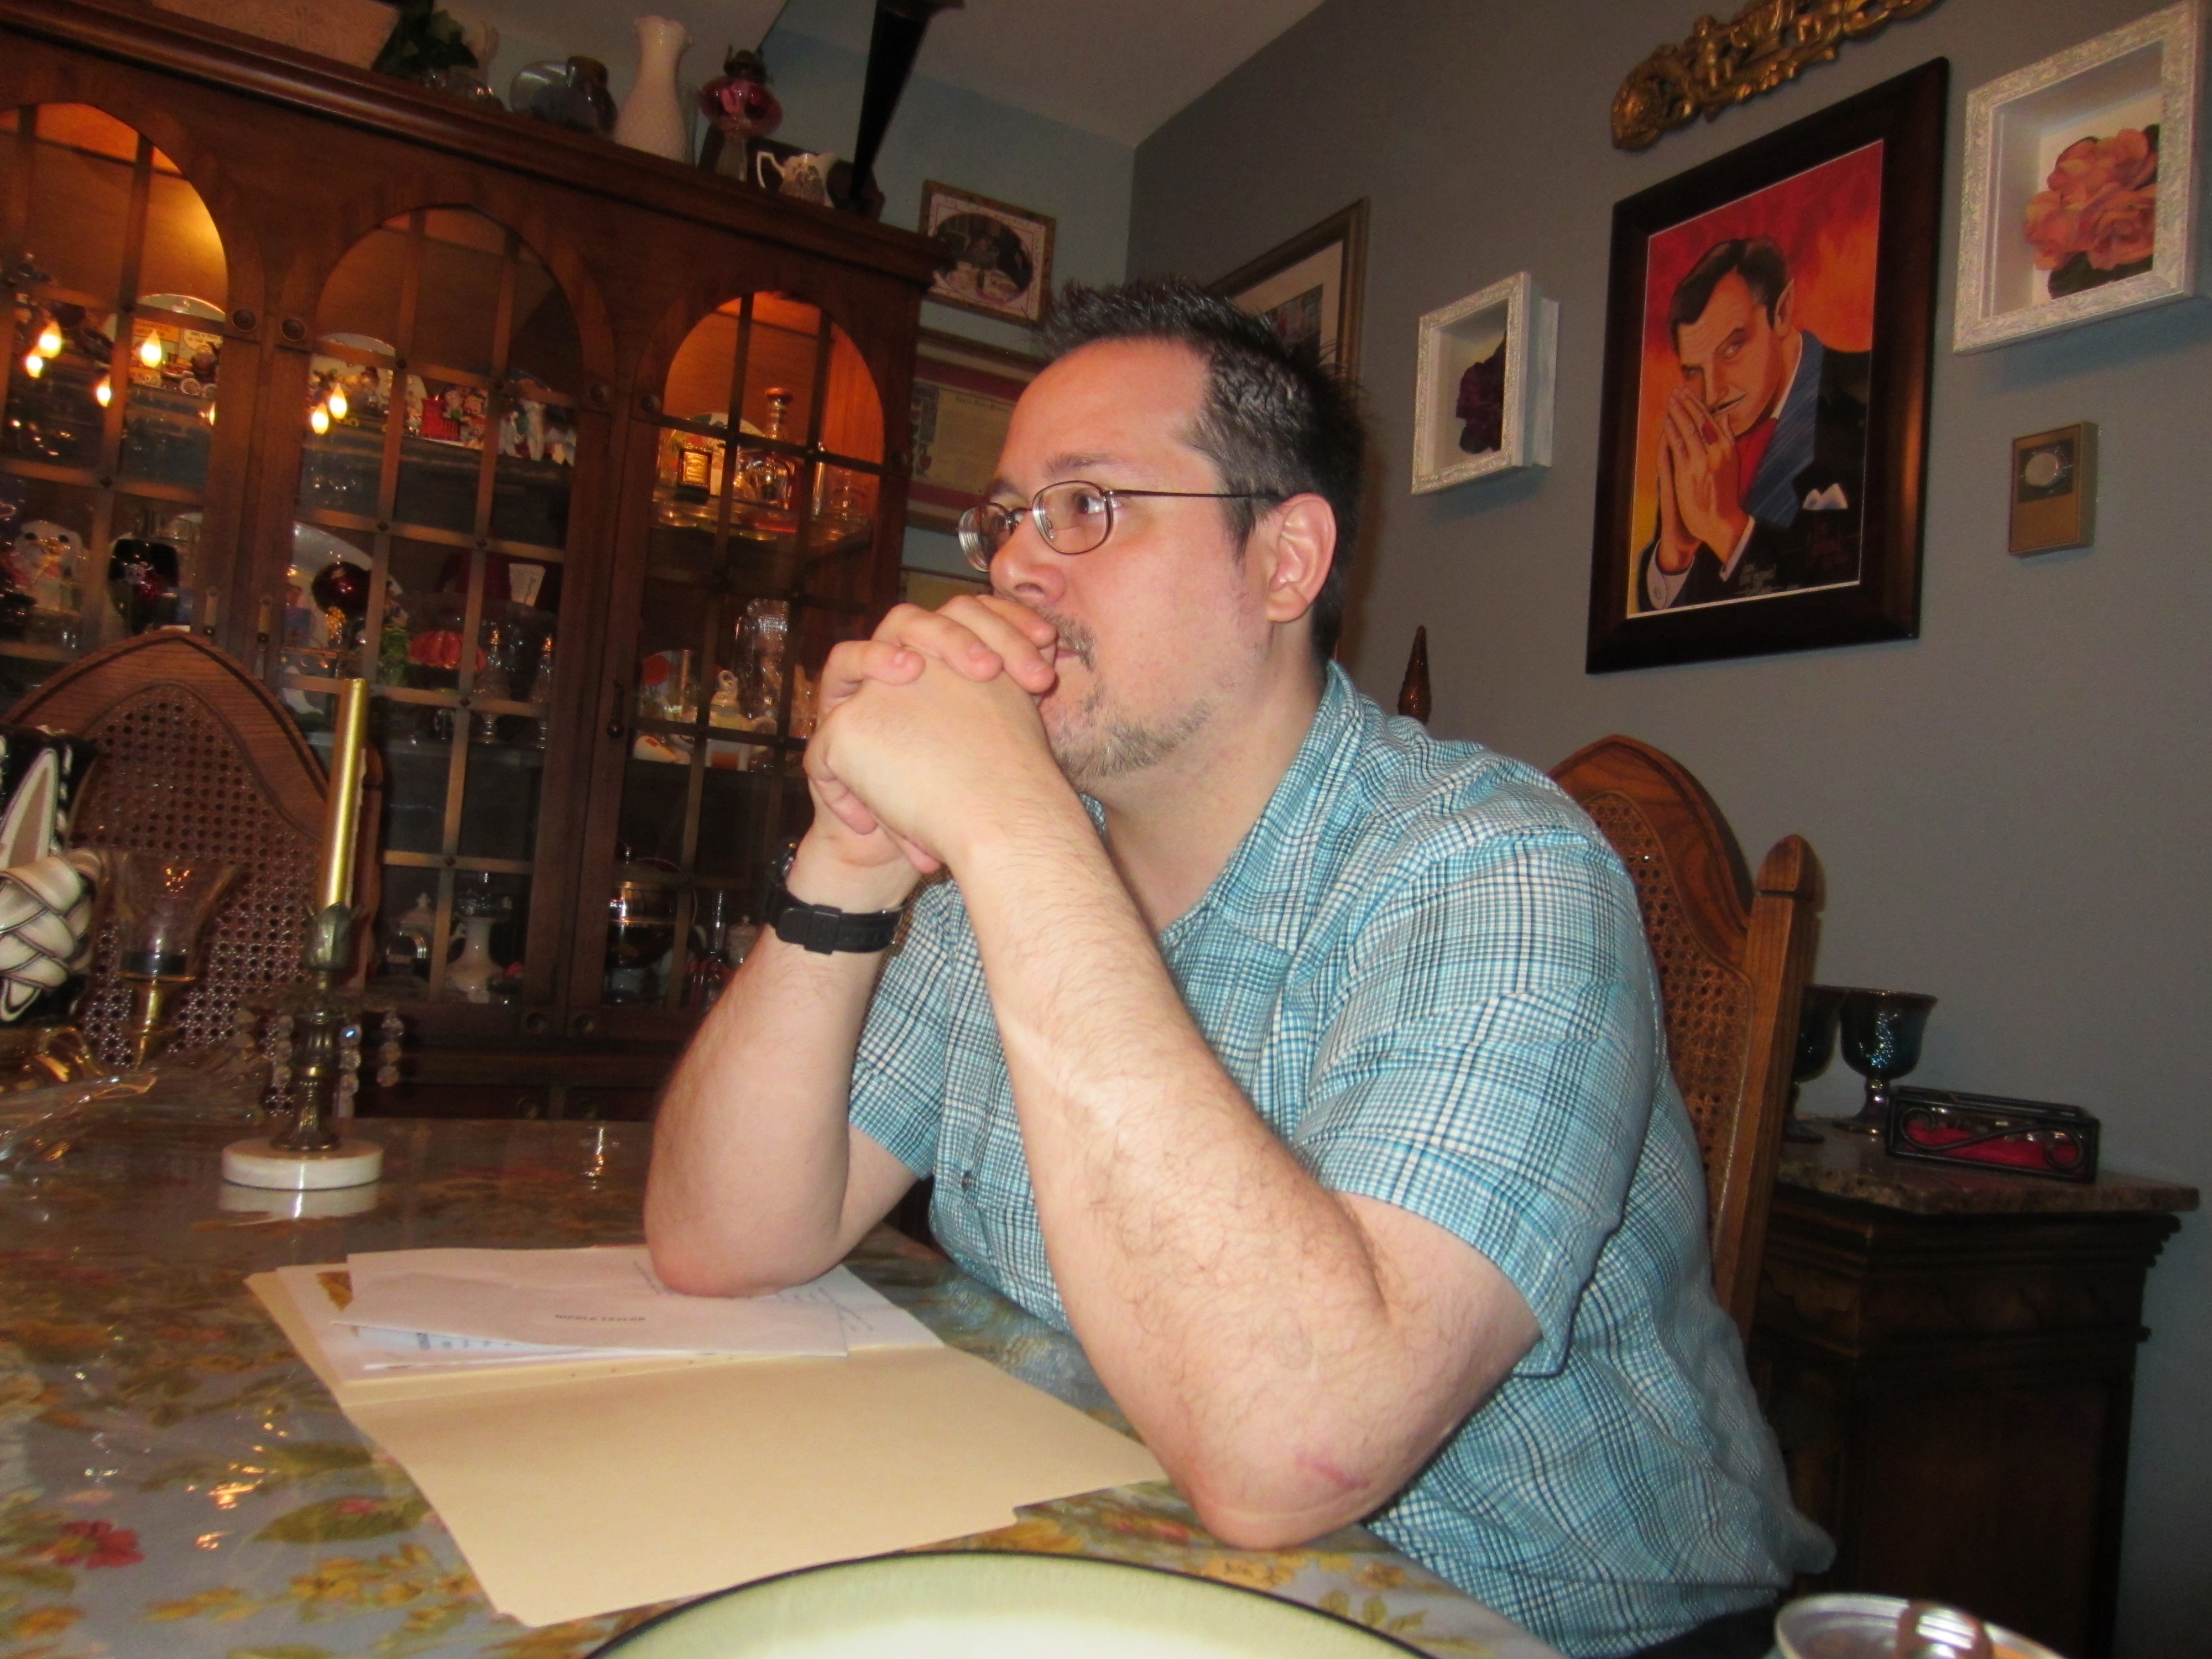 Taken at a brainstorming session where Glen was completely unaware of the painting of Vincent Price hanging behind him.